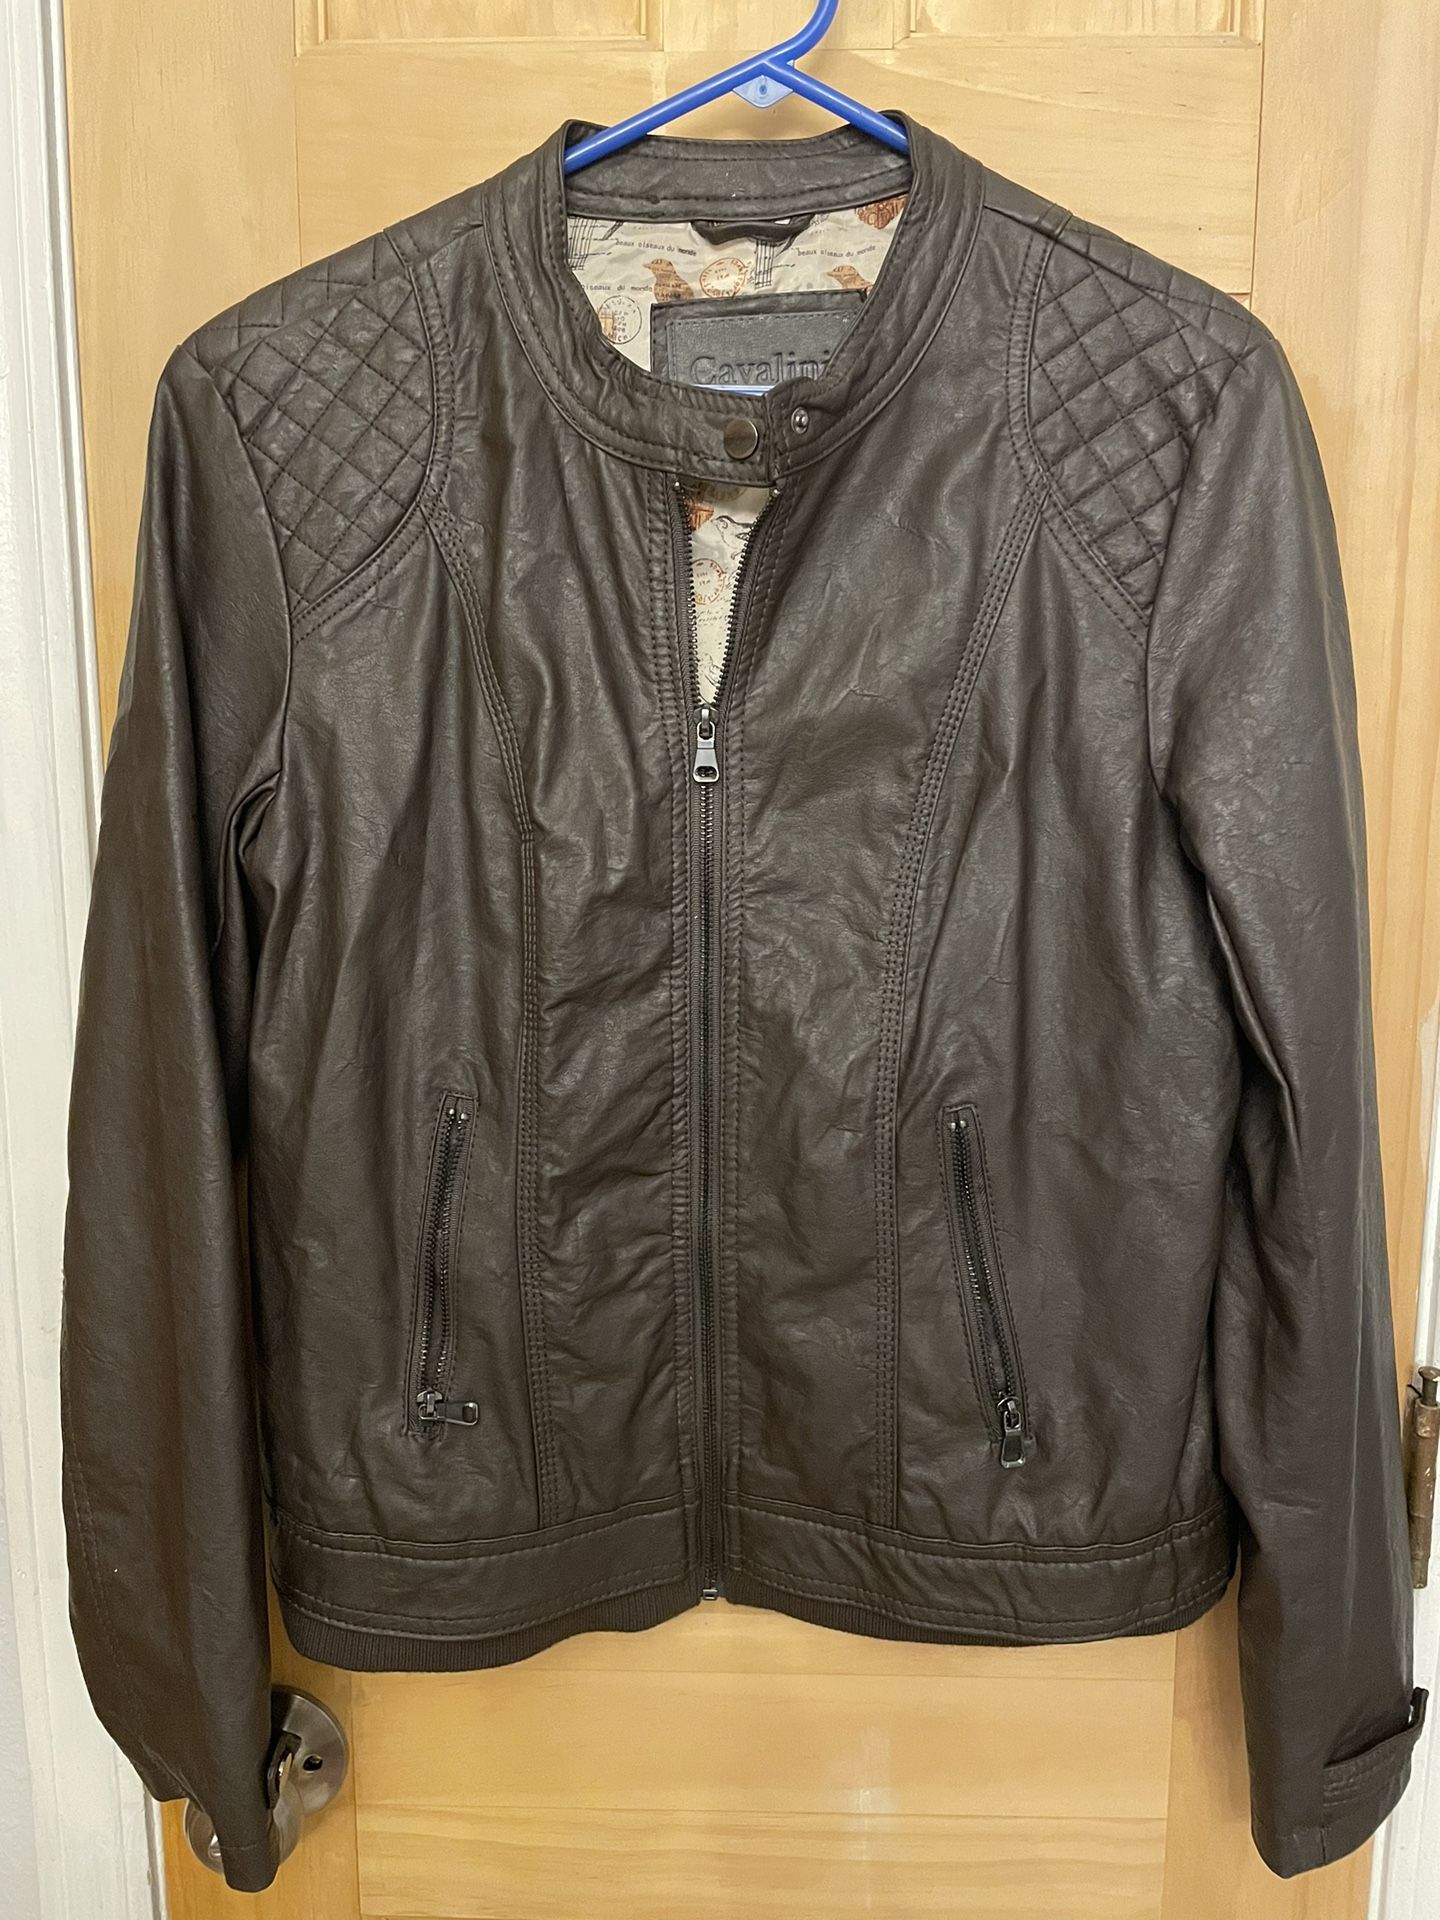 Brown Leather Jacket Womens L